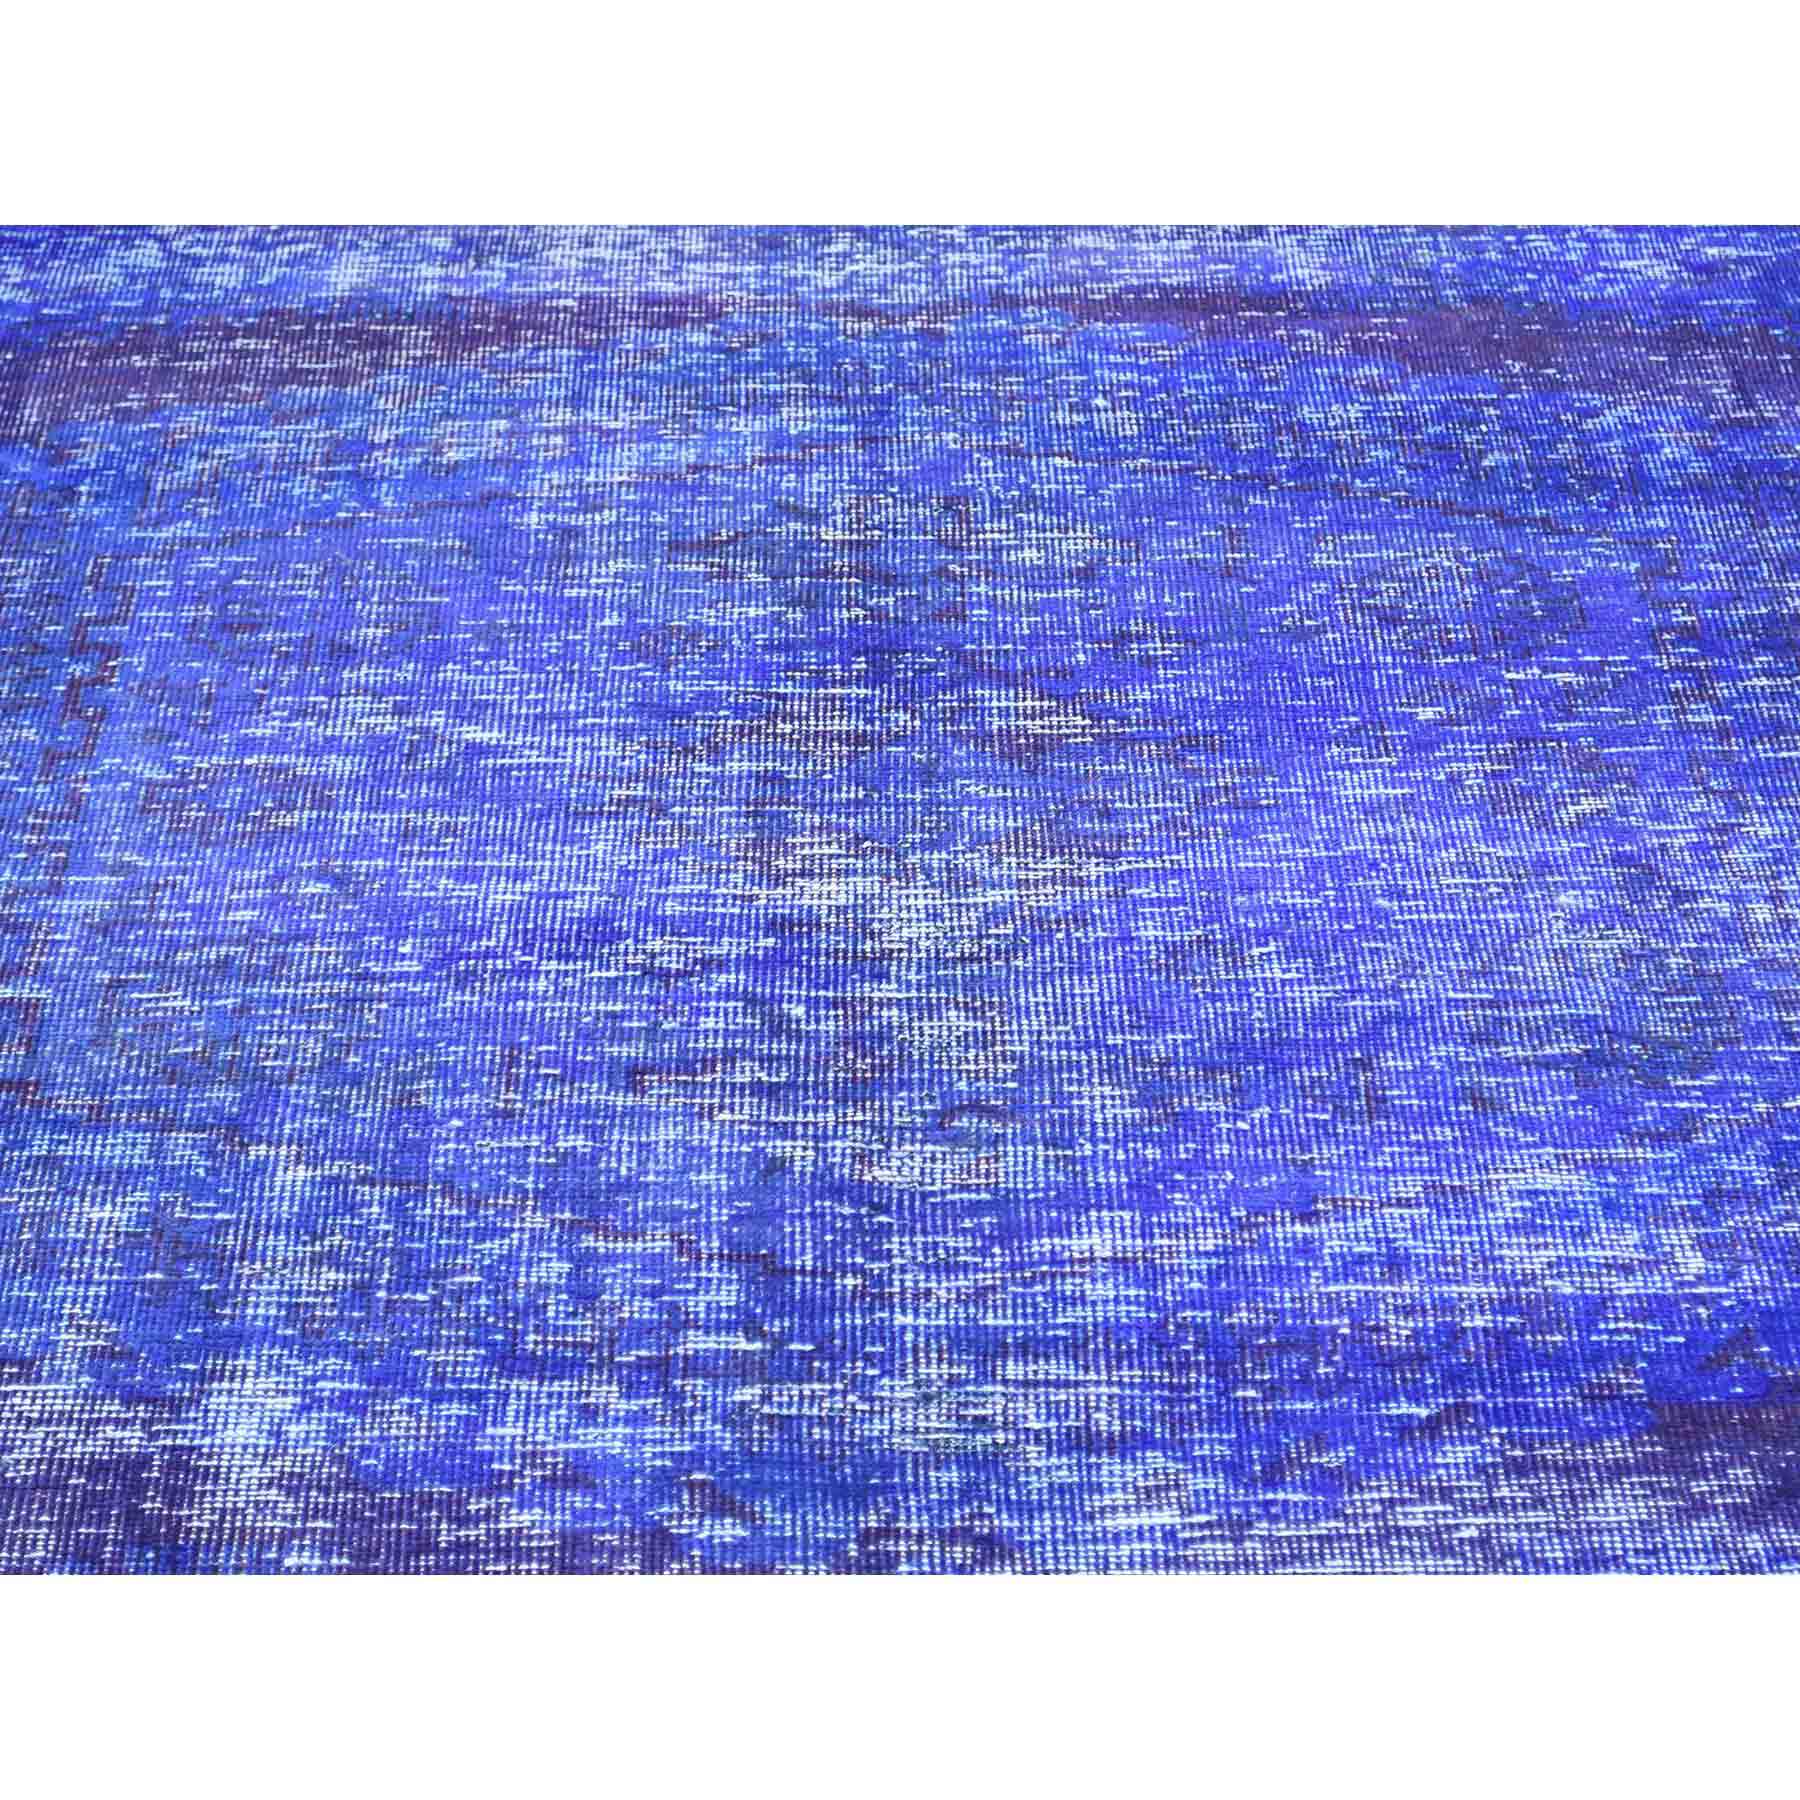 Overdyed-Vintage-Hand-Knotted-Rug-152140